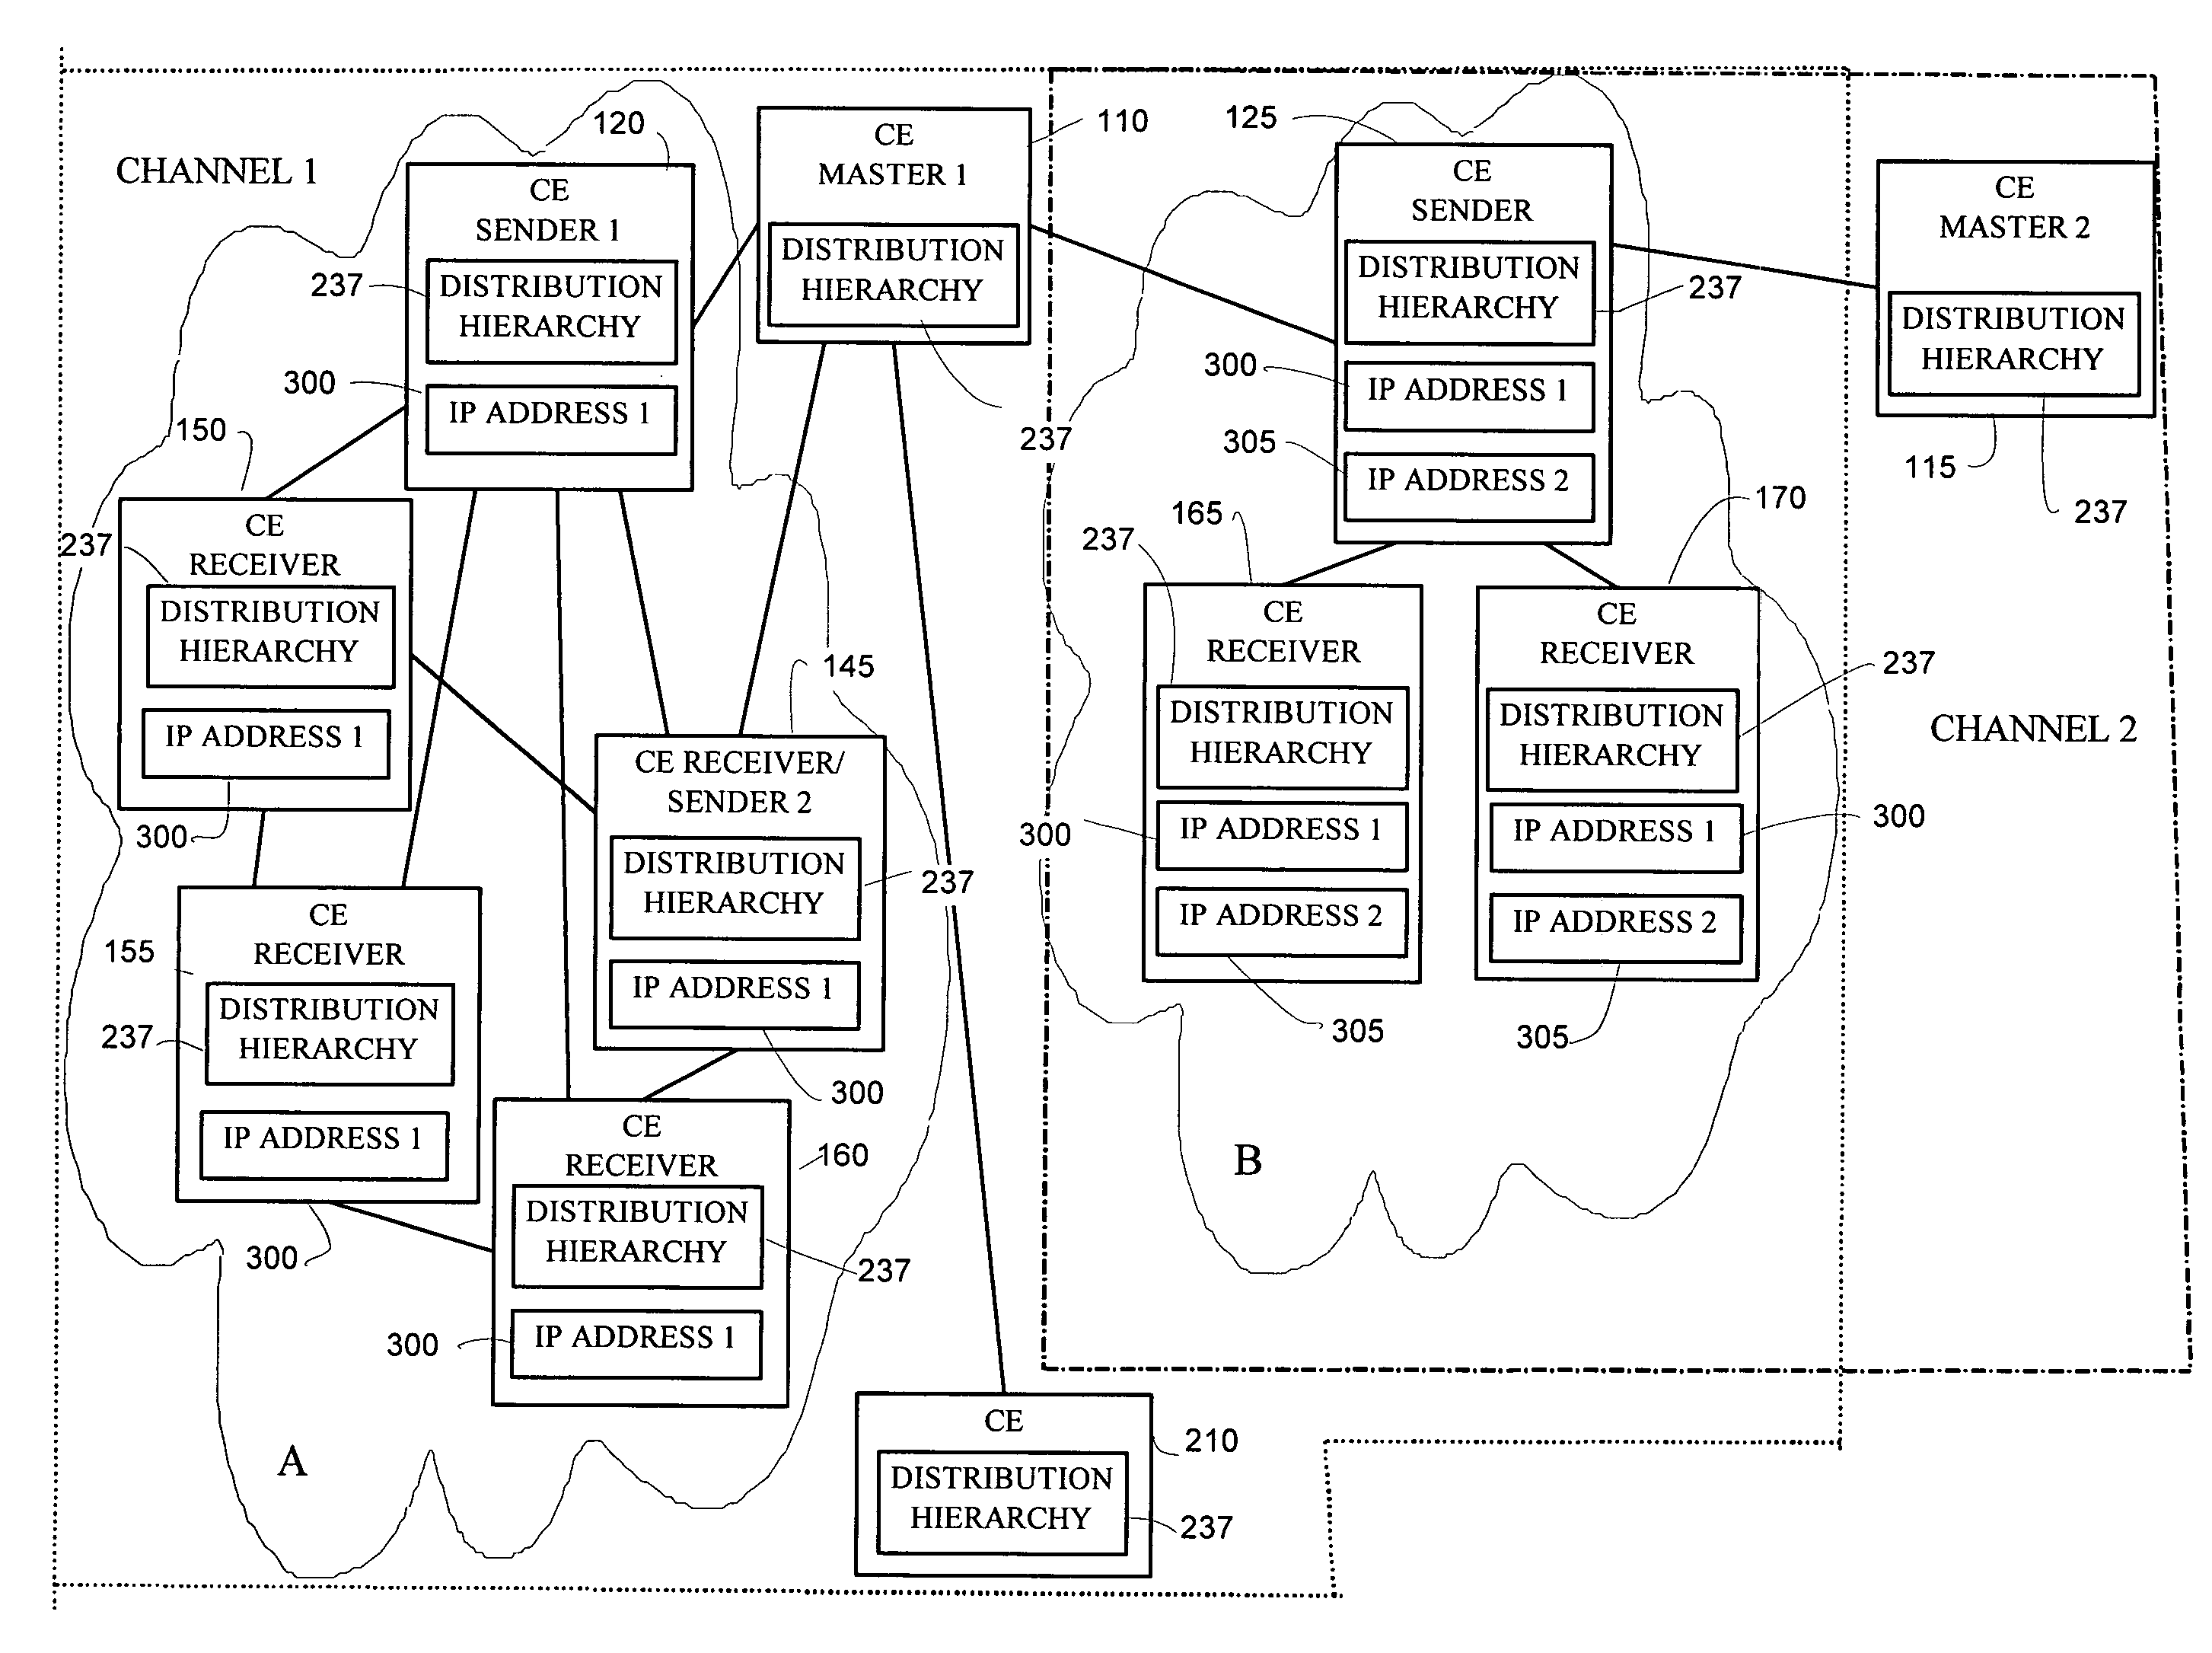 Method and apparatus for multicast cloud with integrated multicast and unicast channel routing in a content distribution network